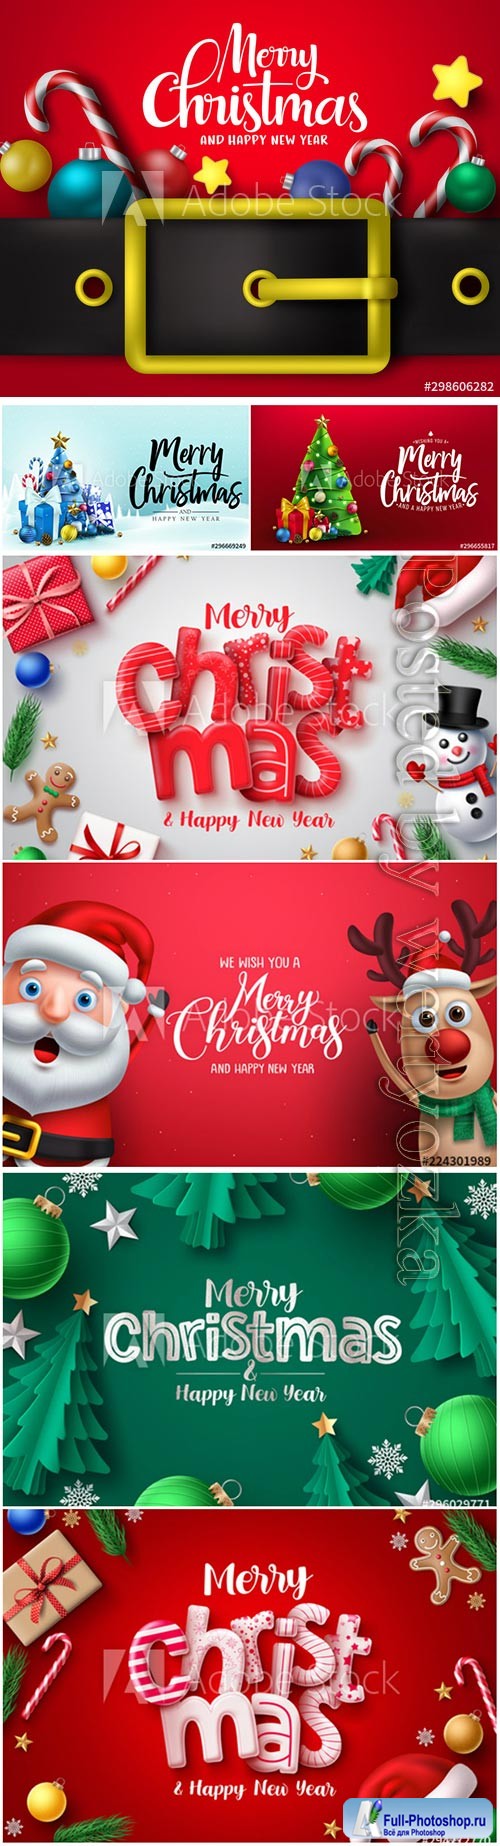 Merry christmas 3d realistic typography in red empty space for text